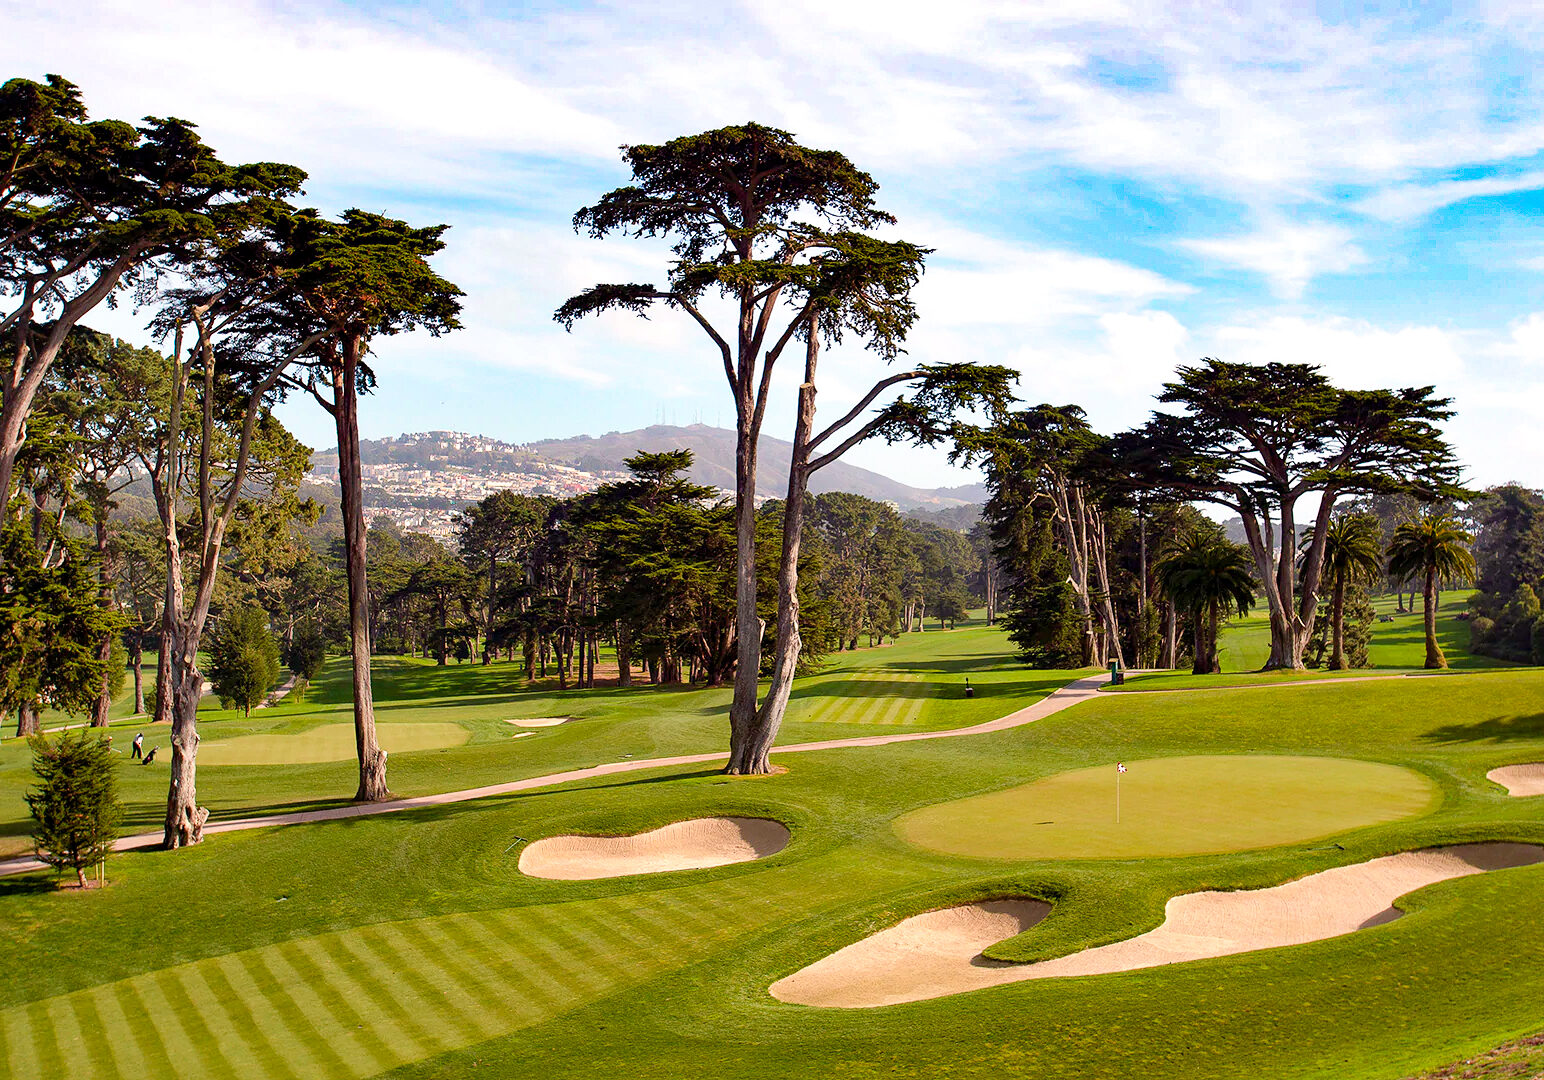 Tree Care Service for Lake Merced Golf Course